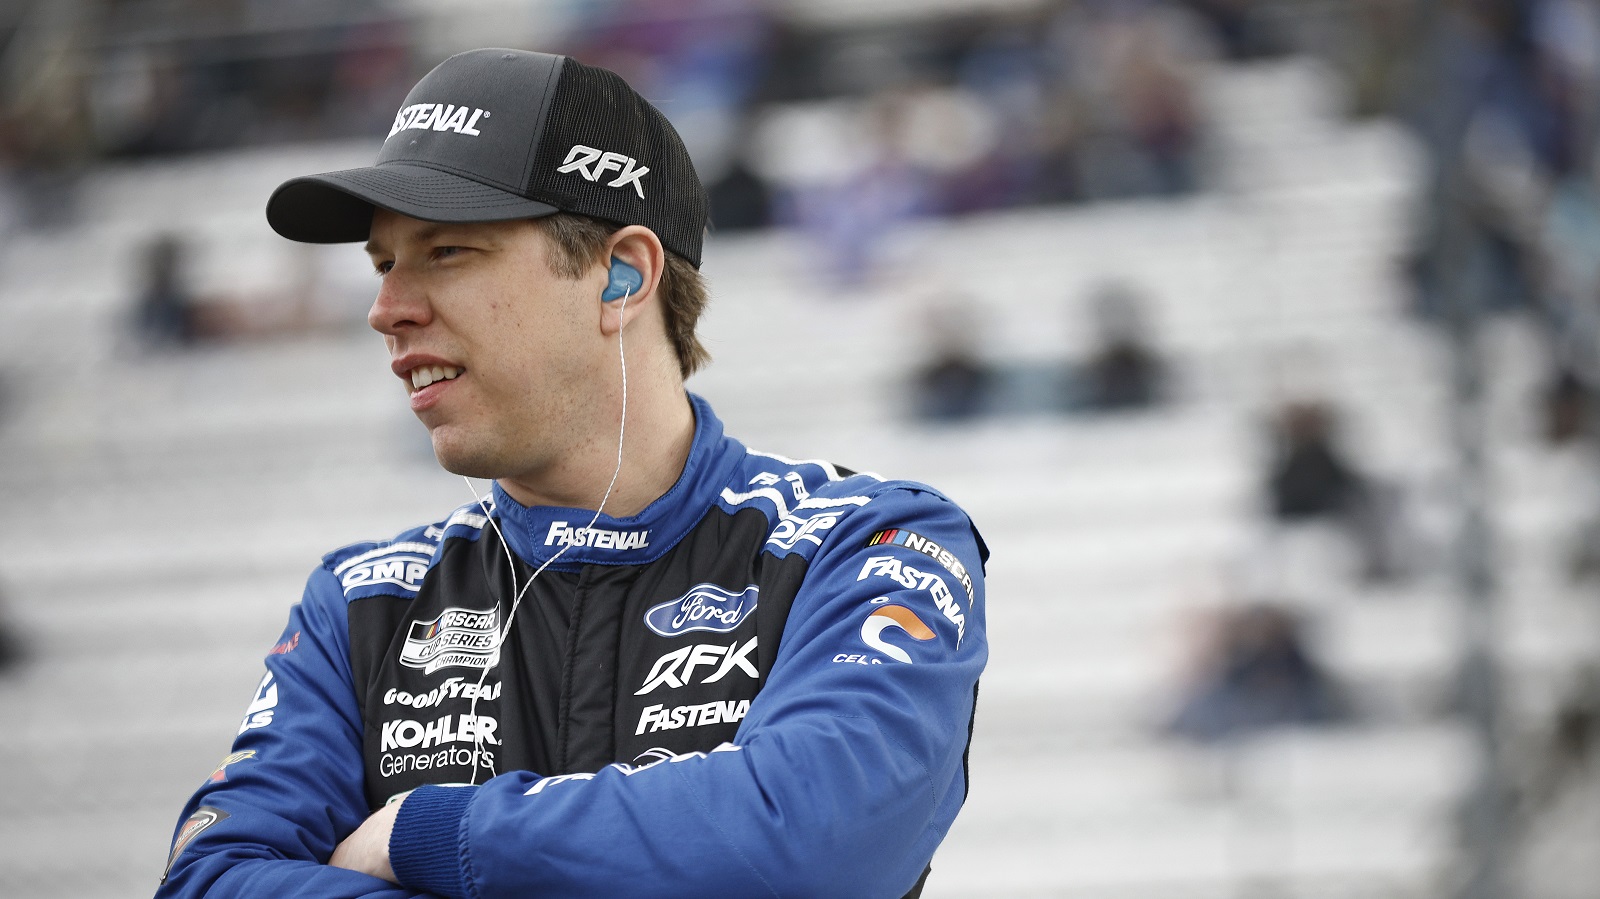 Brad Keselowski looks on during qualifying for the NASCAR Cup Series Blue-Emu Maximum Pain Relief 400 at Martinsville Speedway on April 8, 2022 in Martinsville, Virginia.